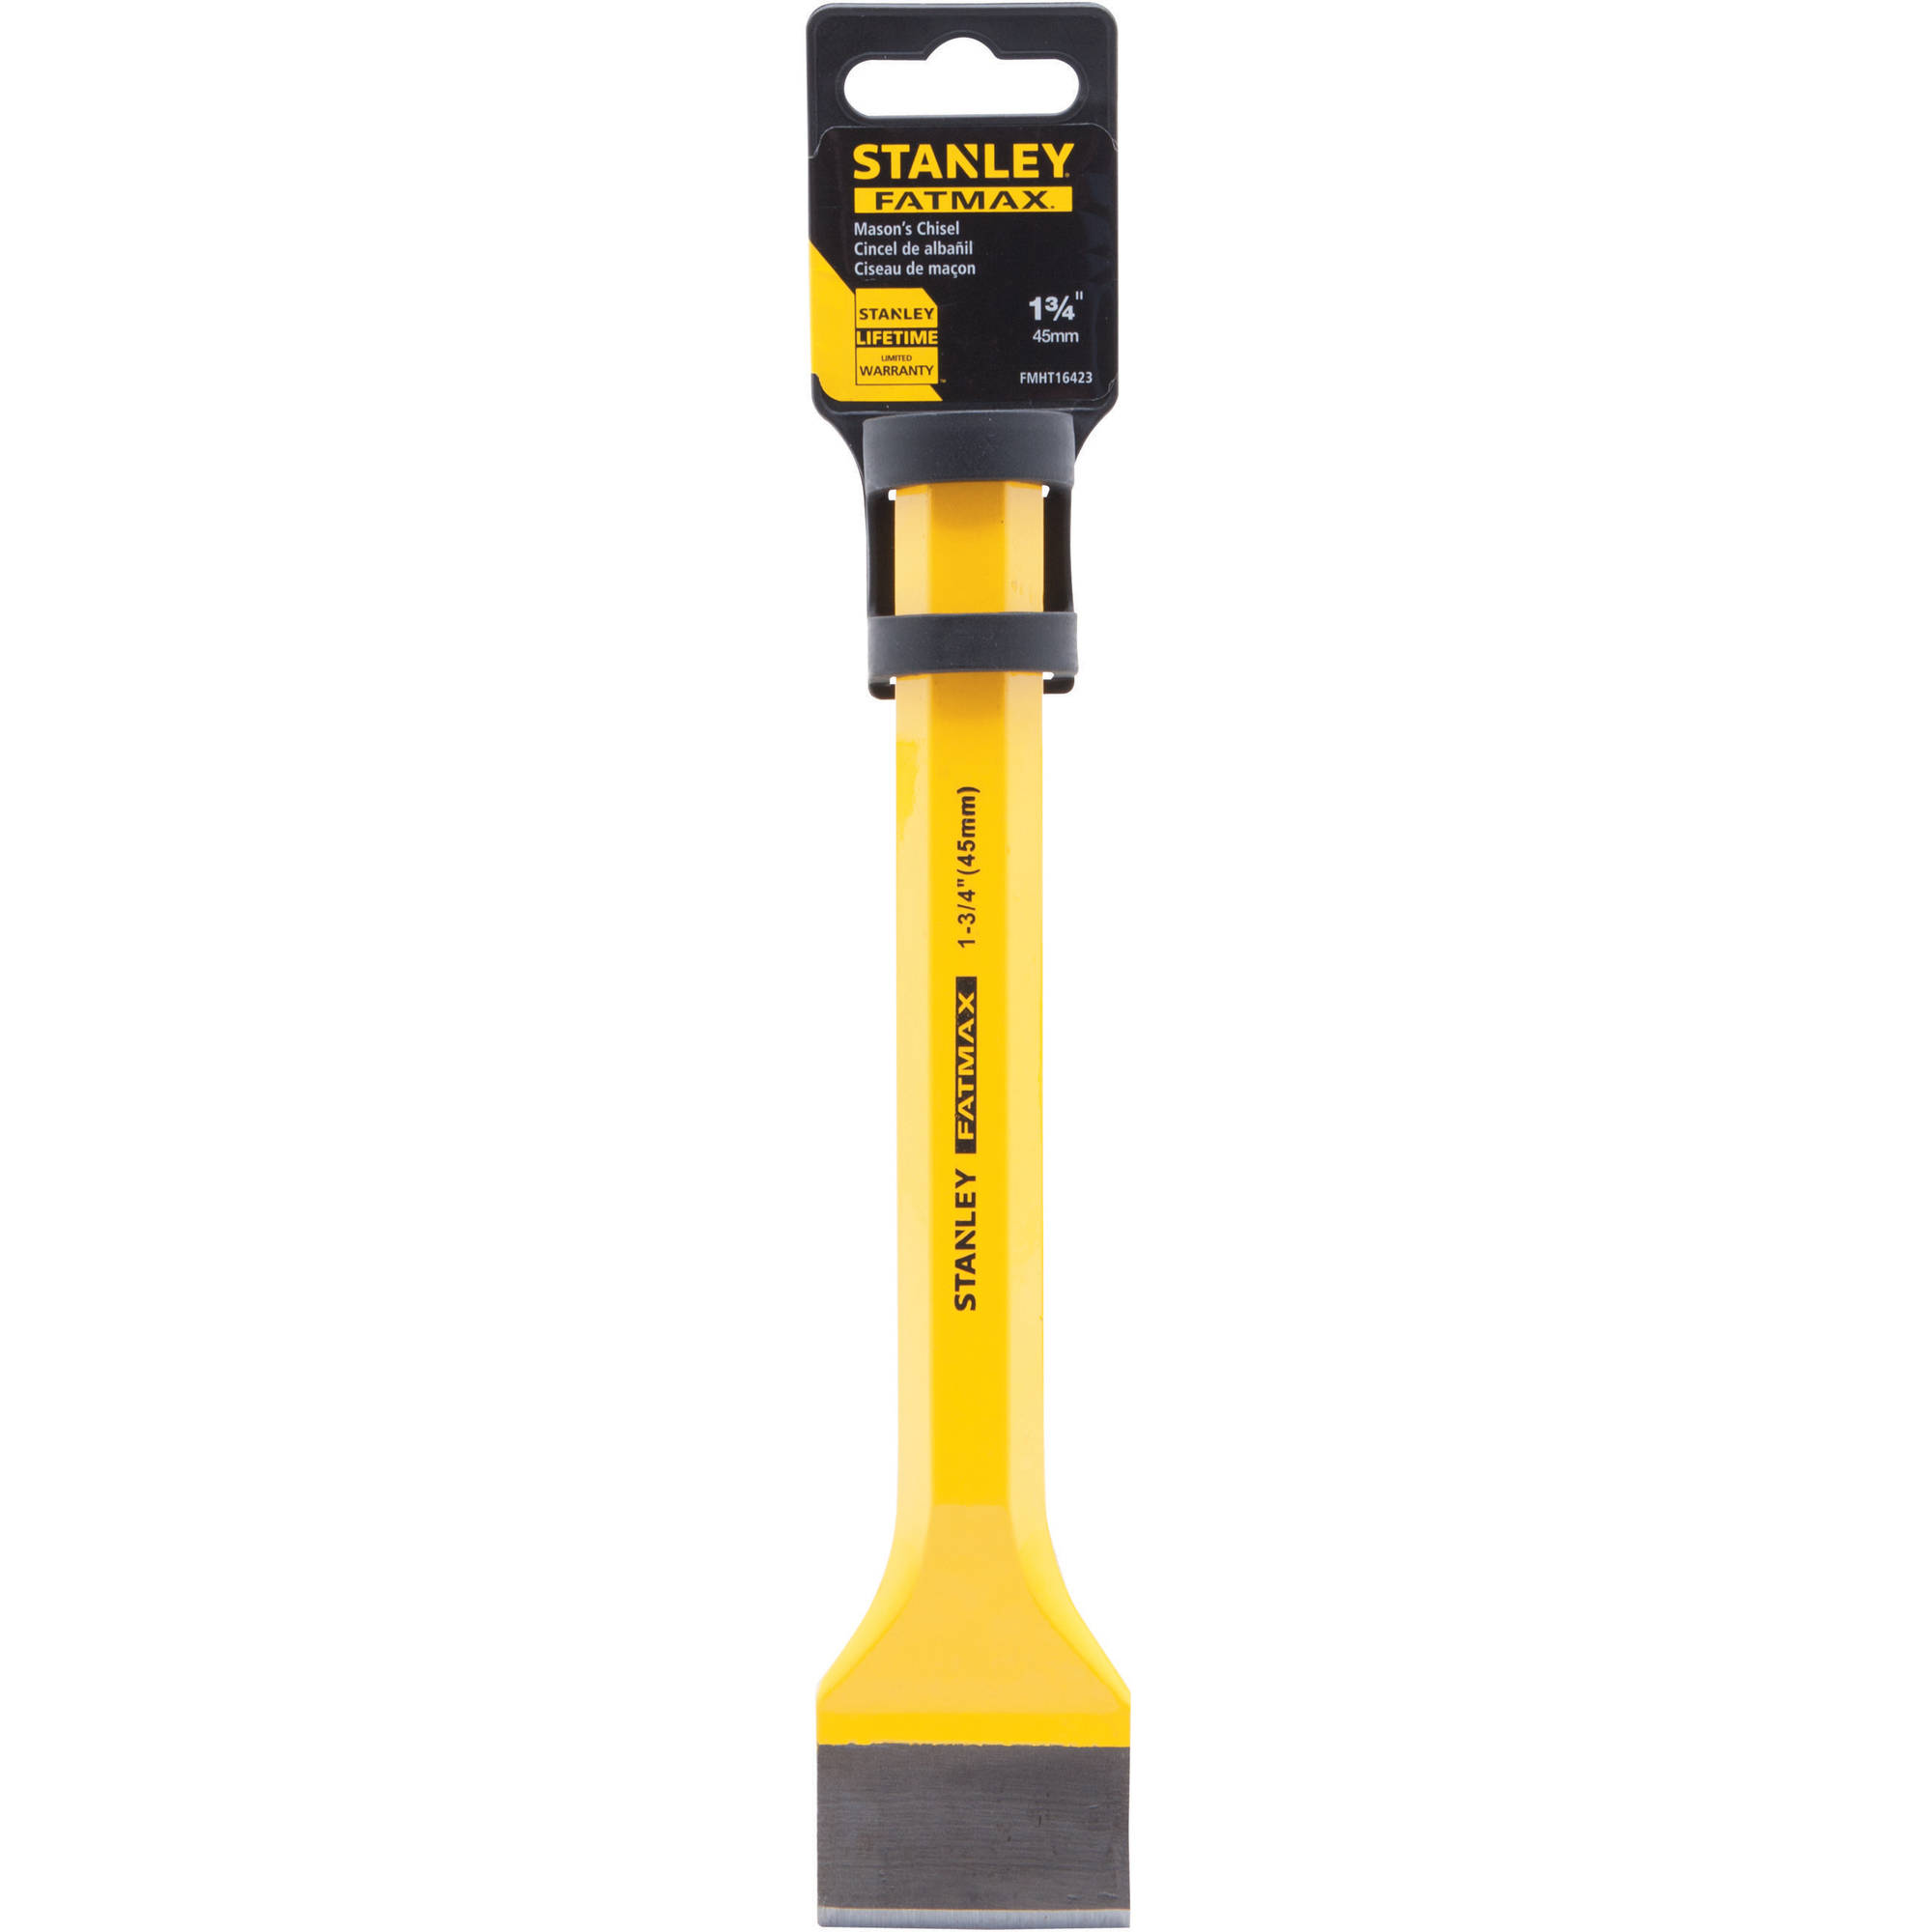 Stanley Fatmax 1-3/4 In. Mason's Chisel - image 2 of 2